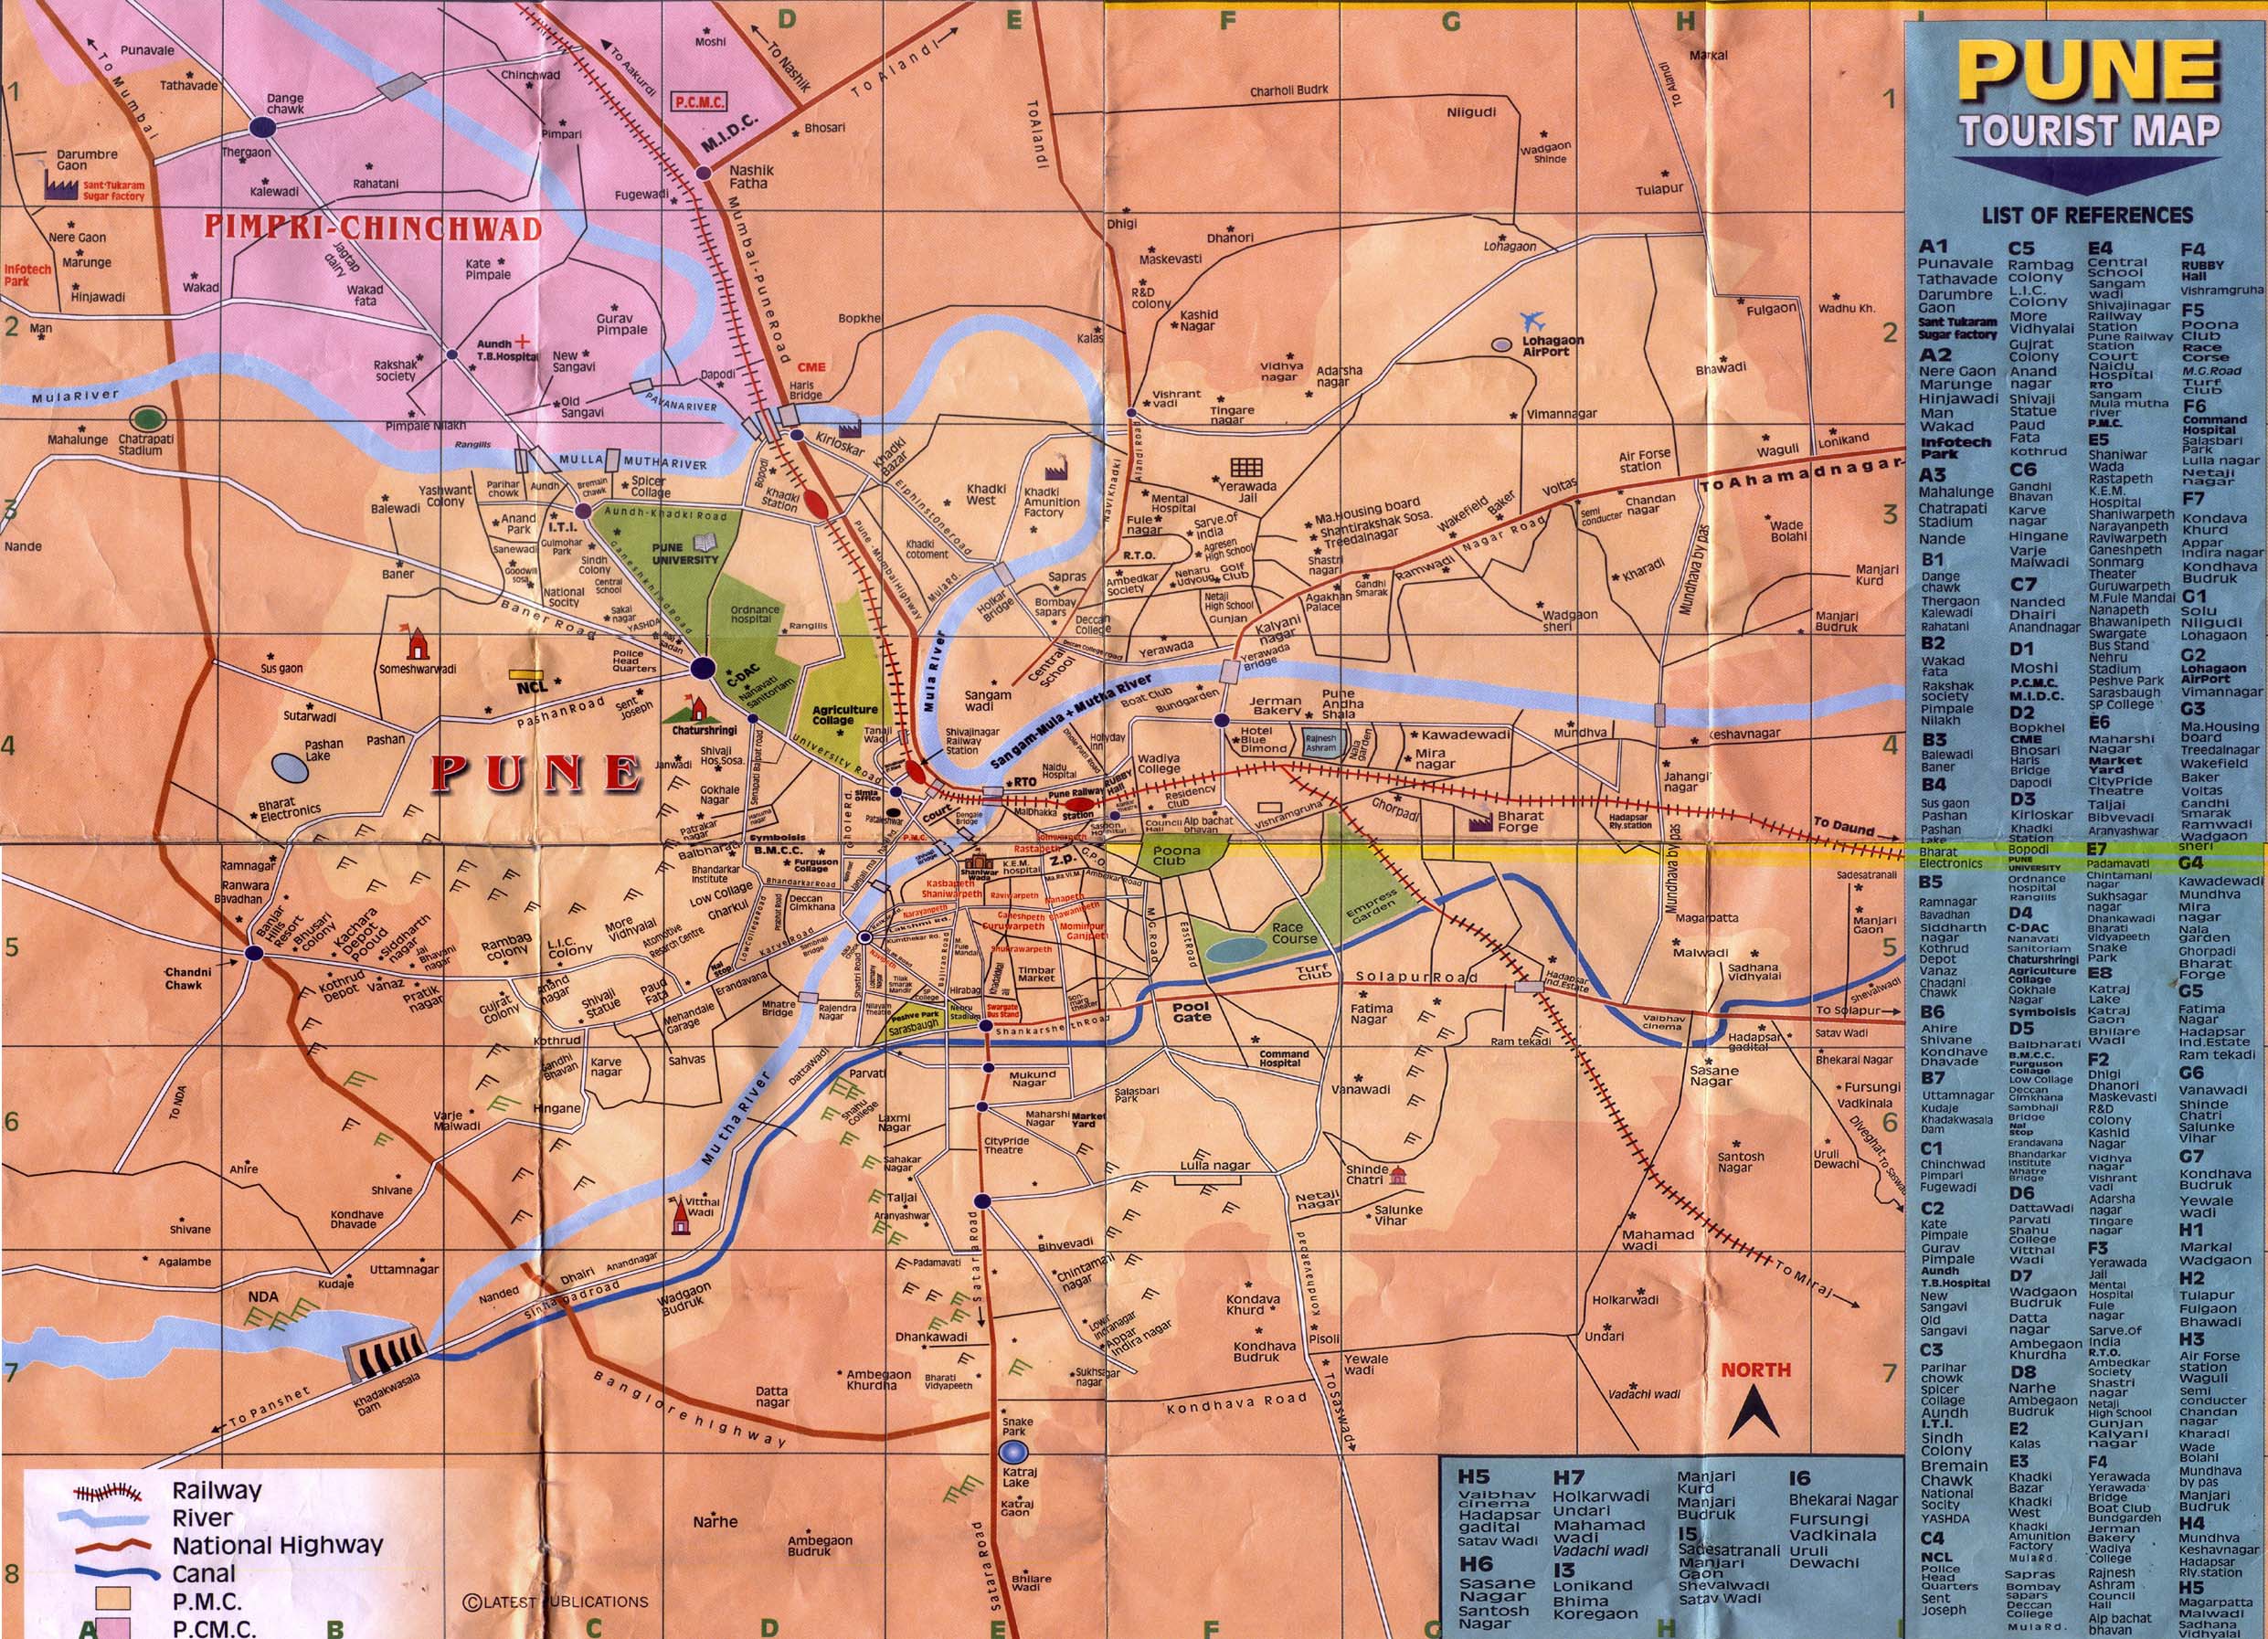 Pune Tourist Map - Pune India • mappery